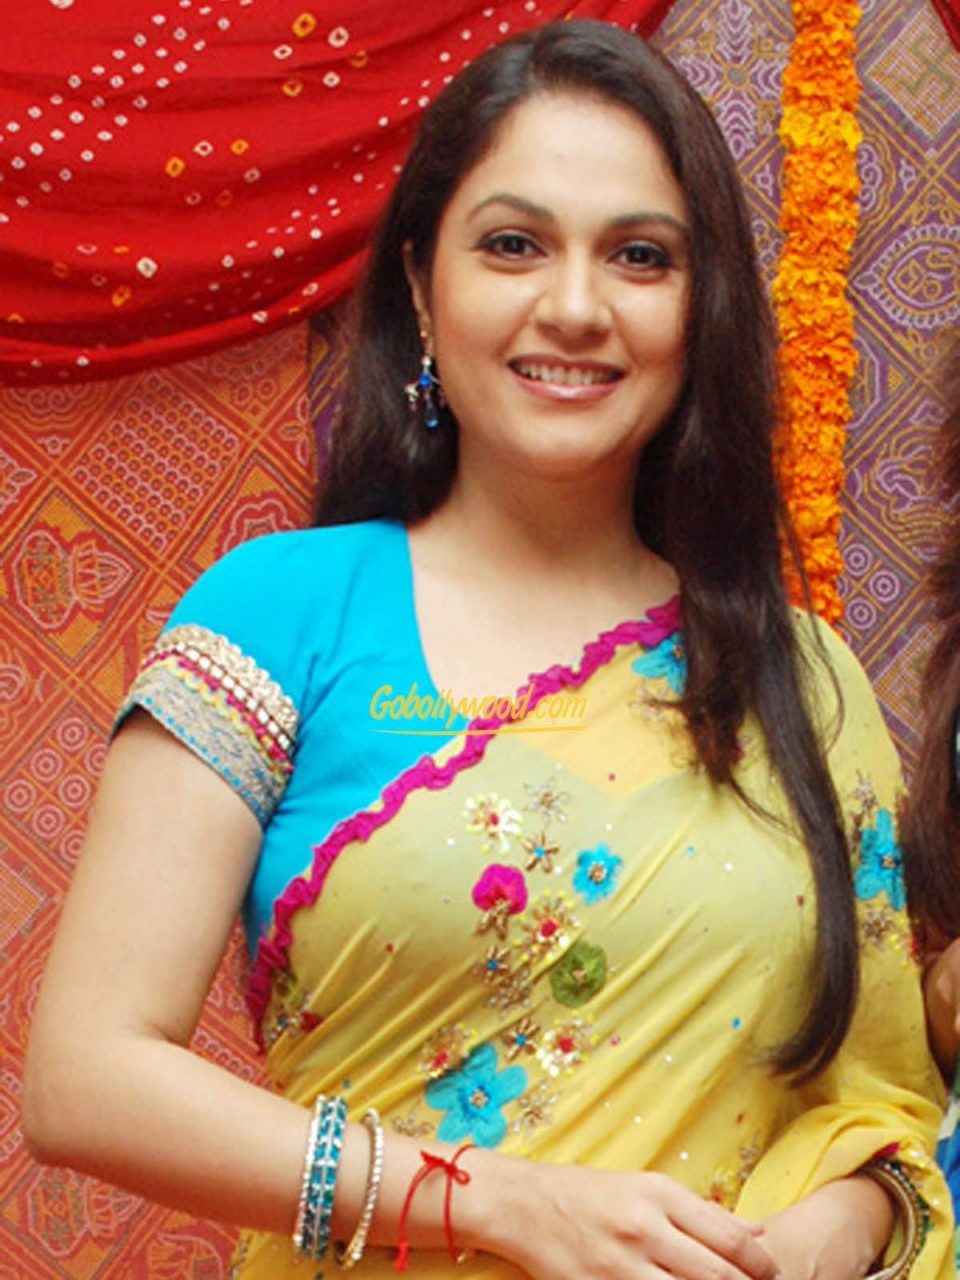 Sizzling Saree Pics Of Gracy Singh